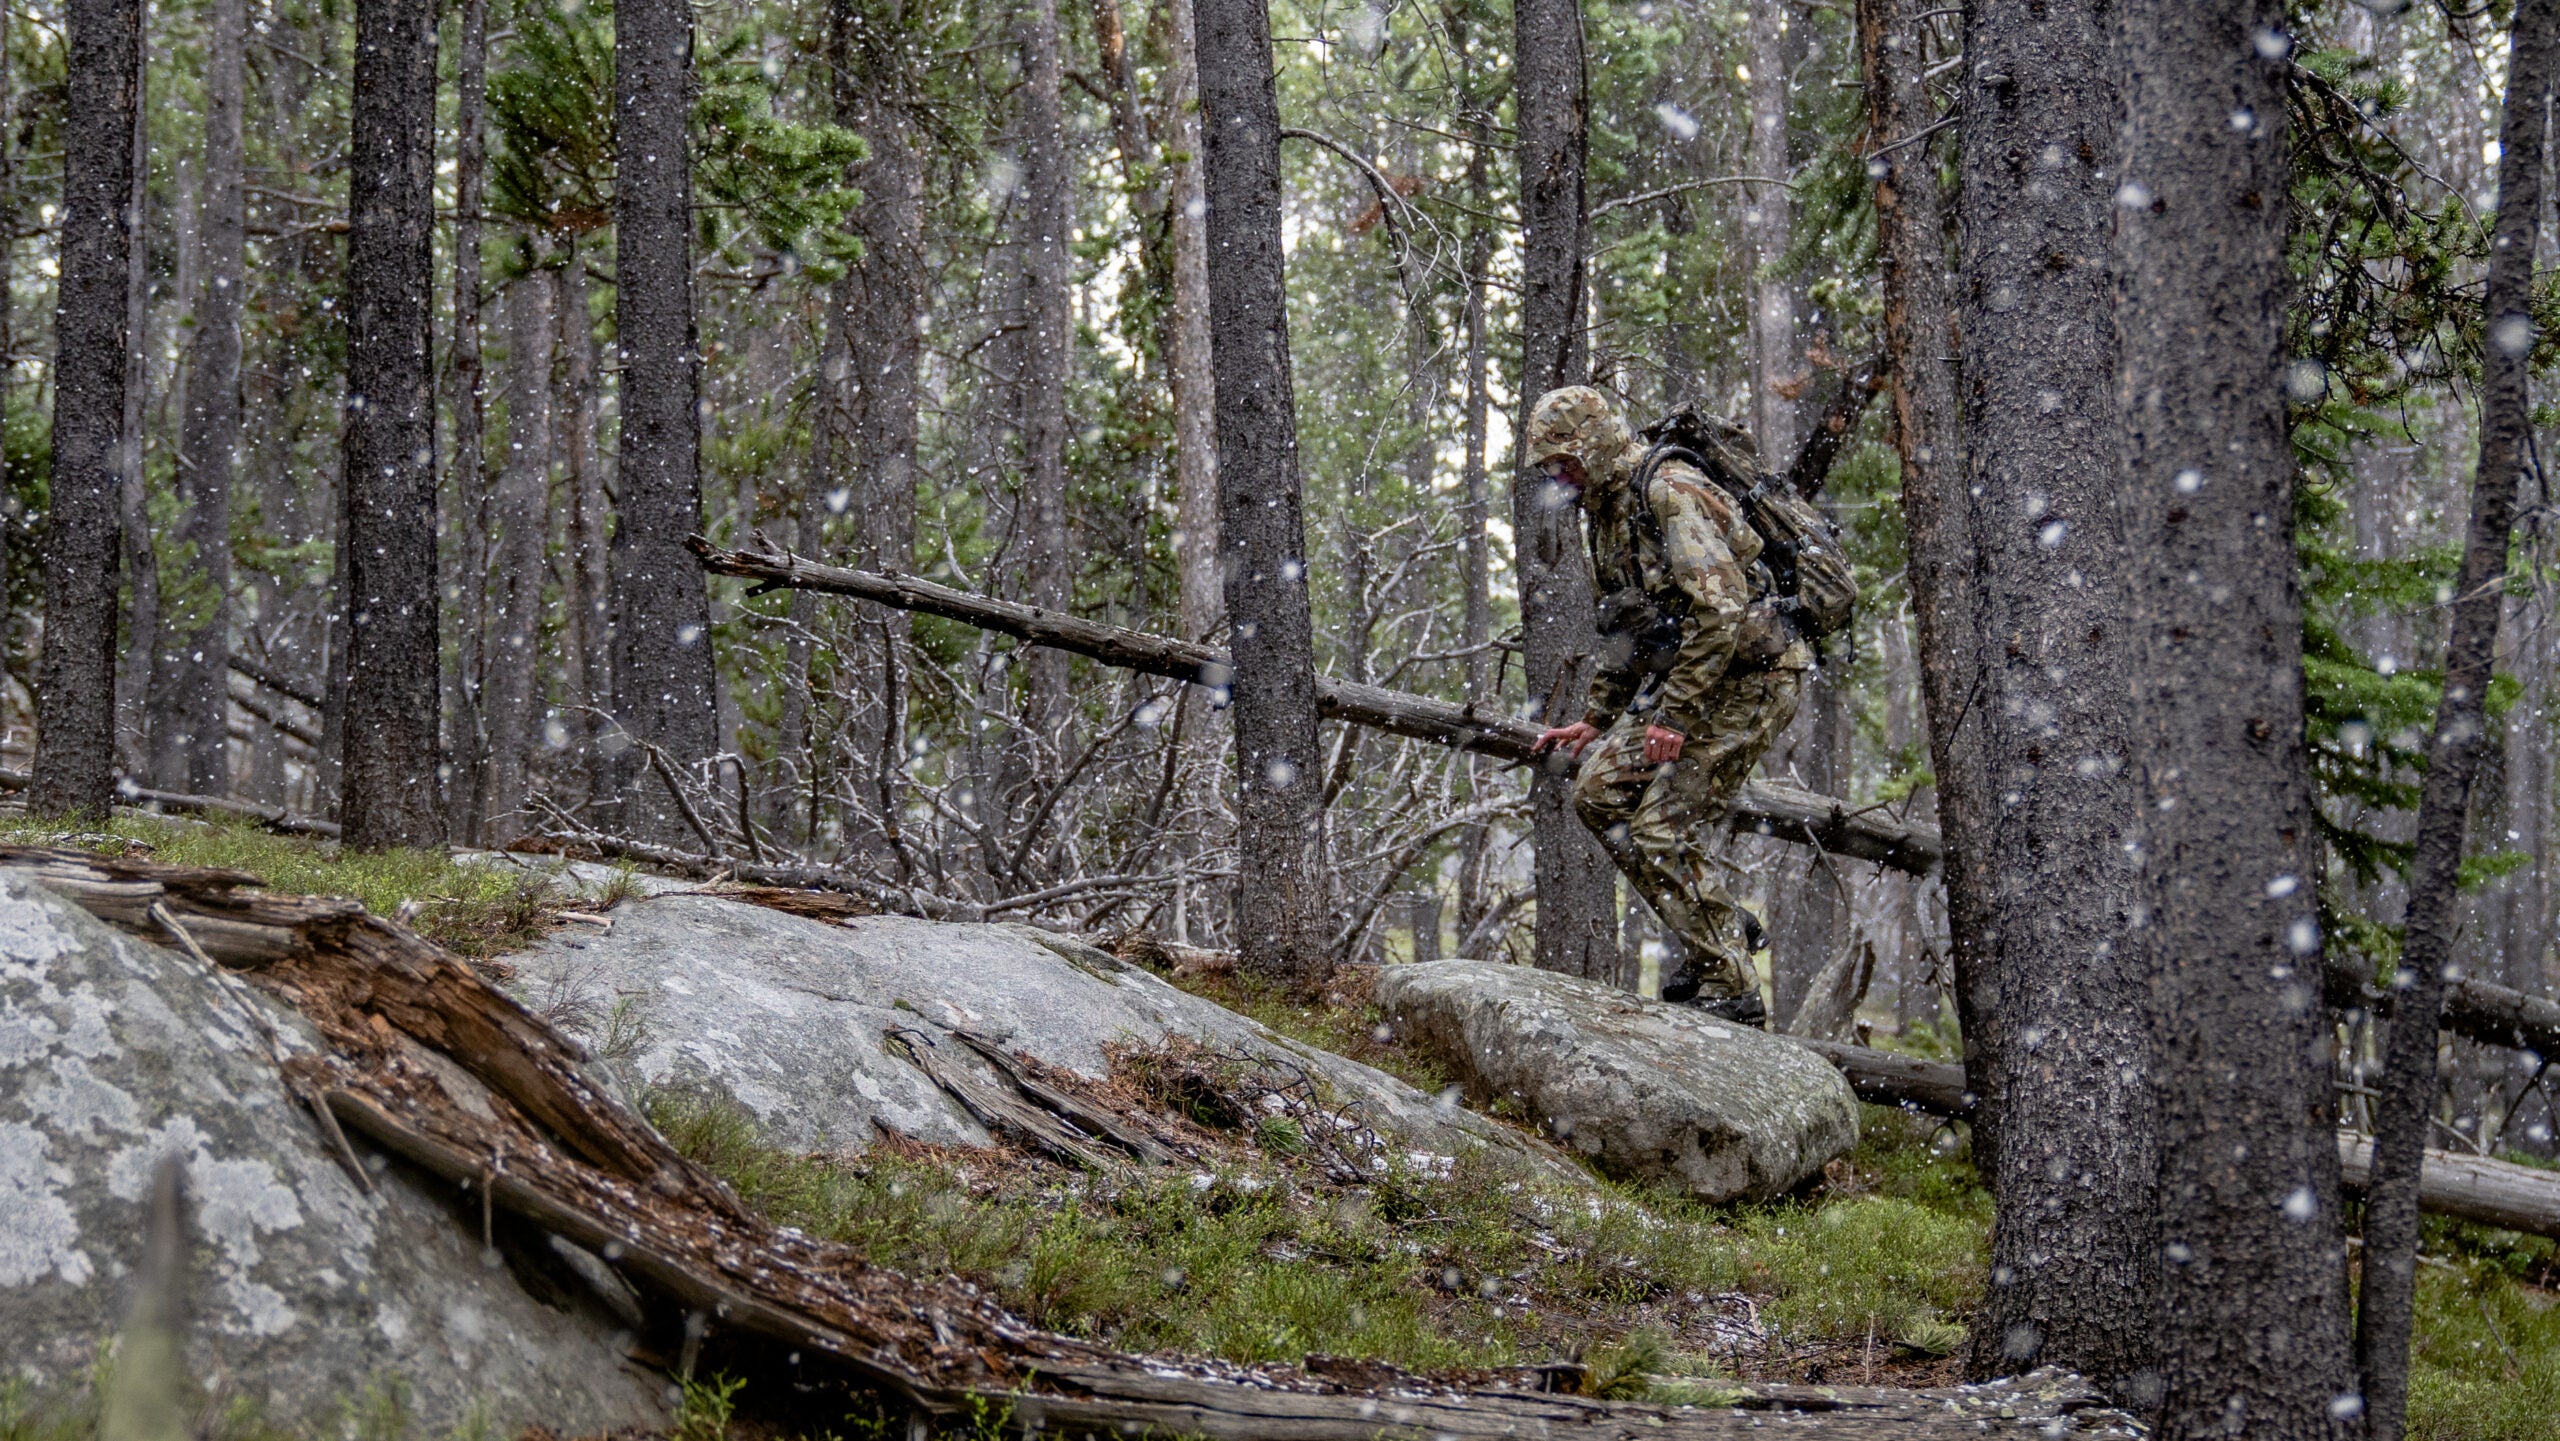 Tested: Kuiu's New Line of Women's Hunting Clothing